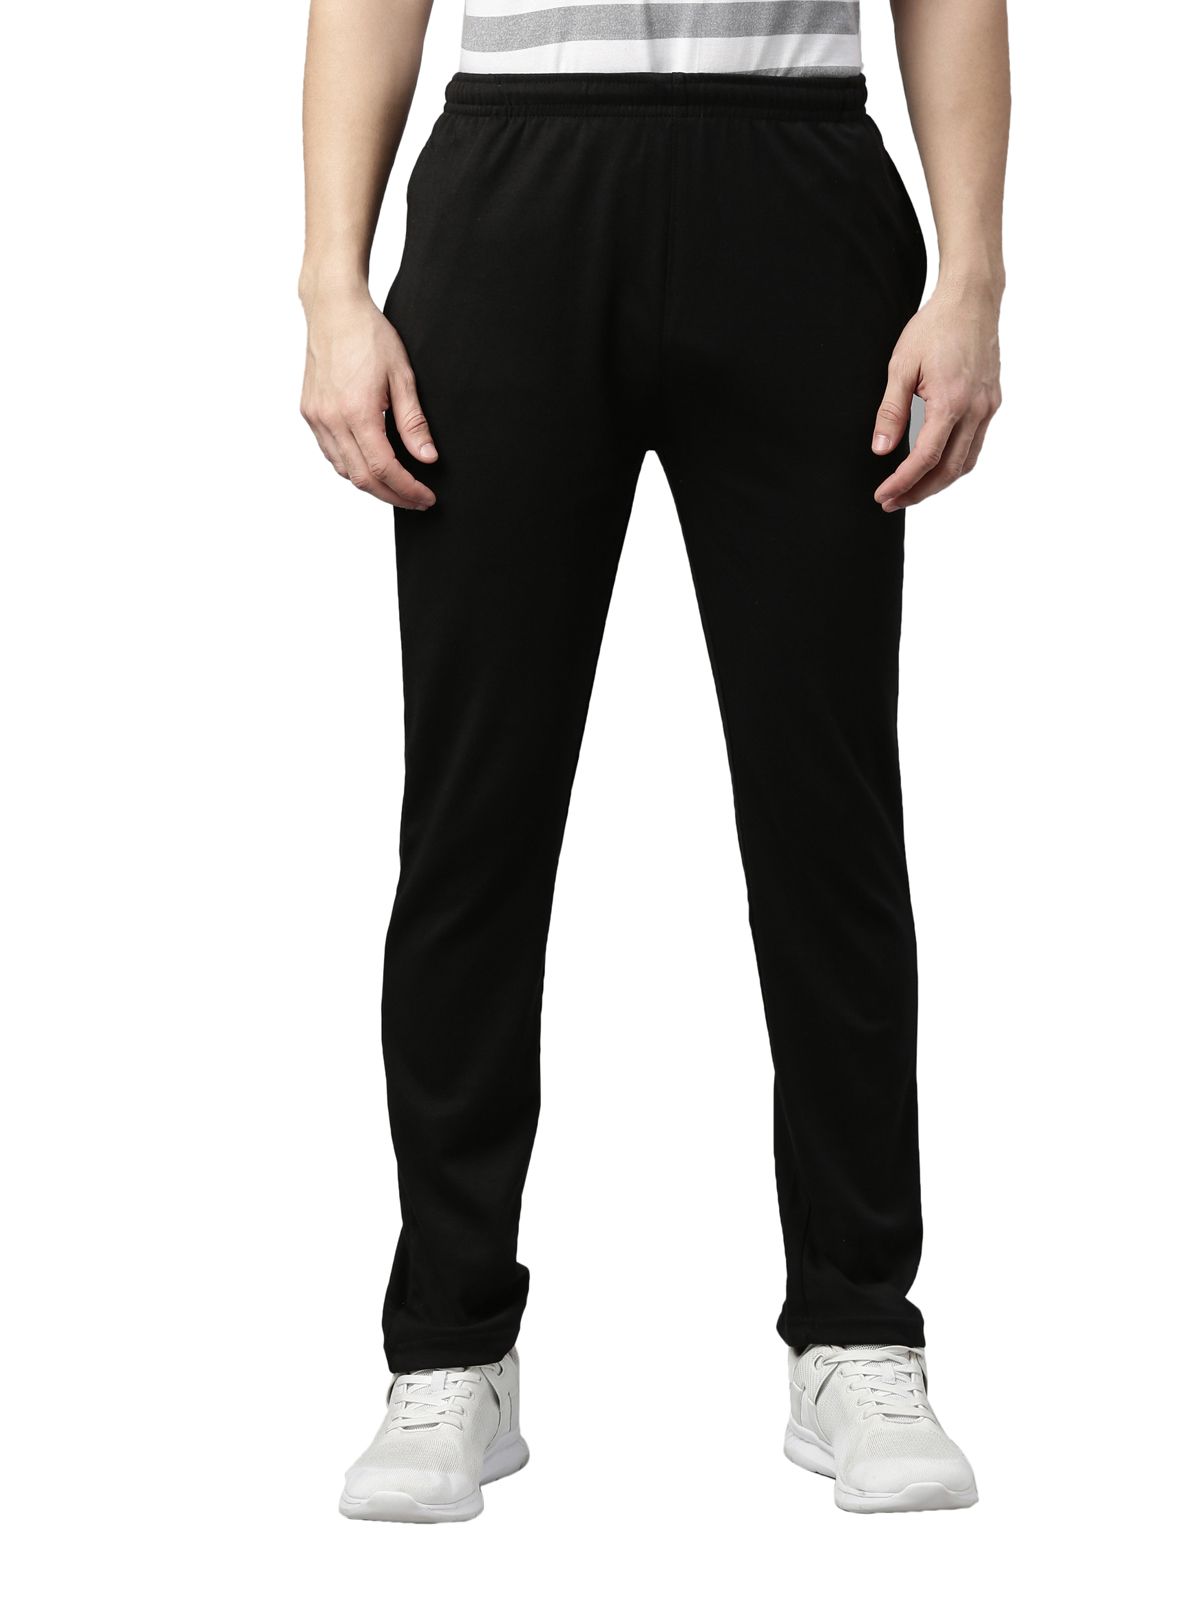 Athleisure Track Pants for Women: Buy Athleisure Track Pants for